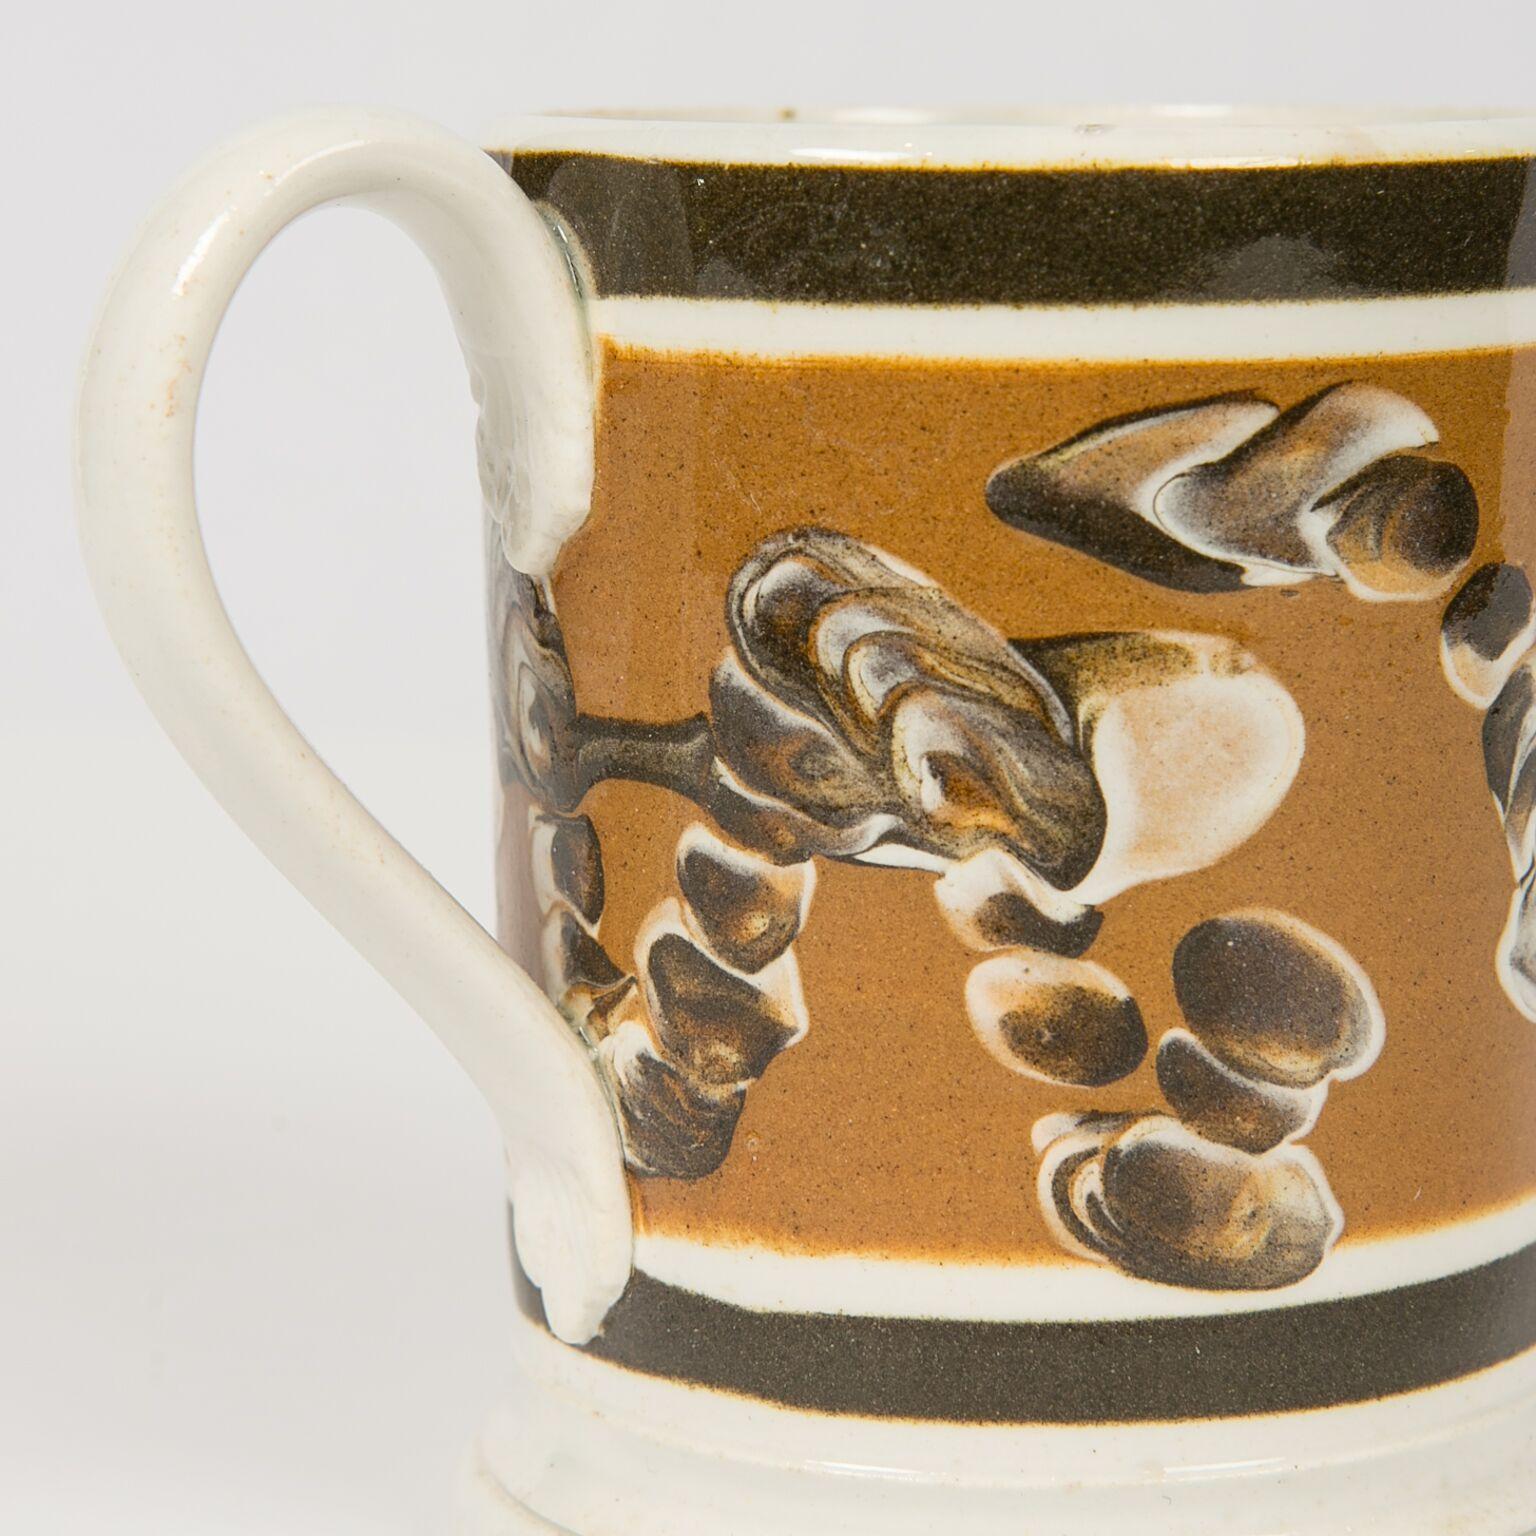 Every piece of Mochaware is unique. Decorated with a three color cable pattern of dark brown, light brown, and white slip this mug is a small gem! Made in England circa 1820 it would have been turned on a lathe. The turner decorated the mug with